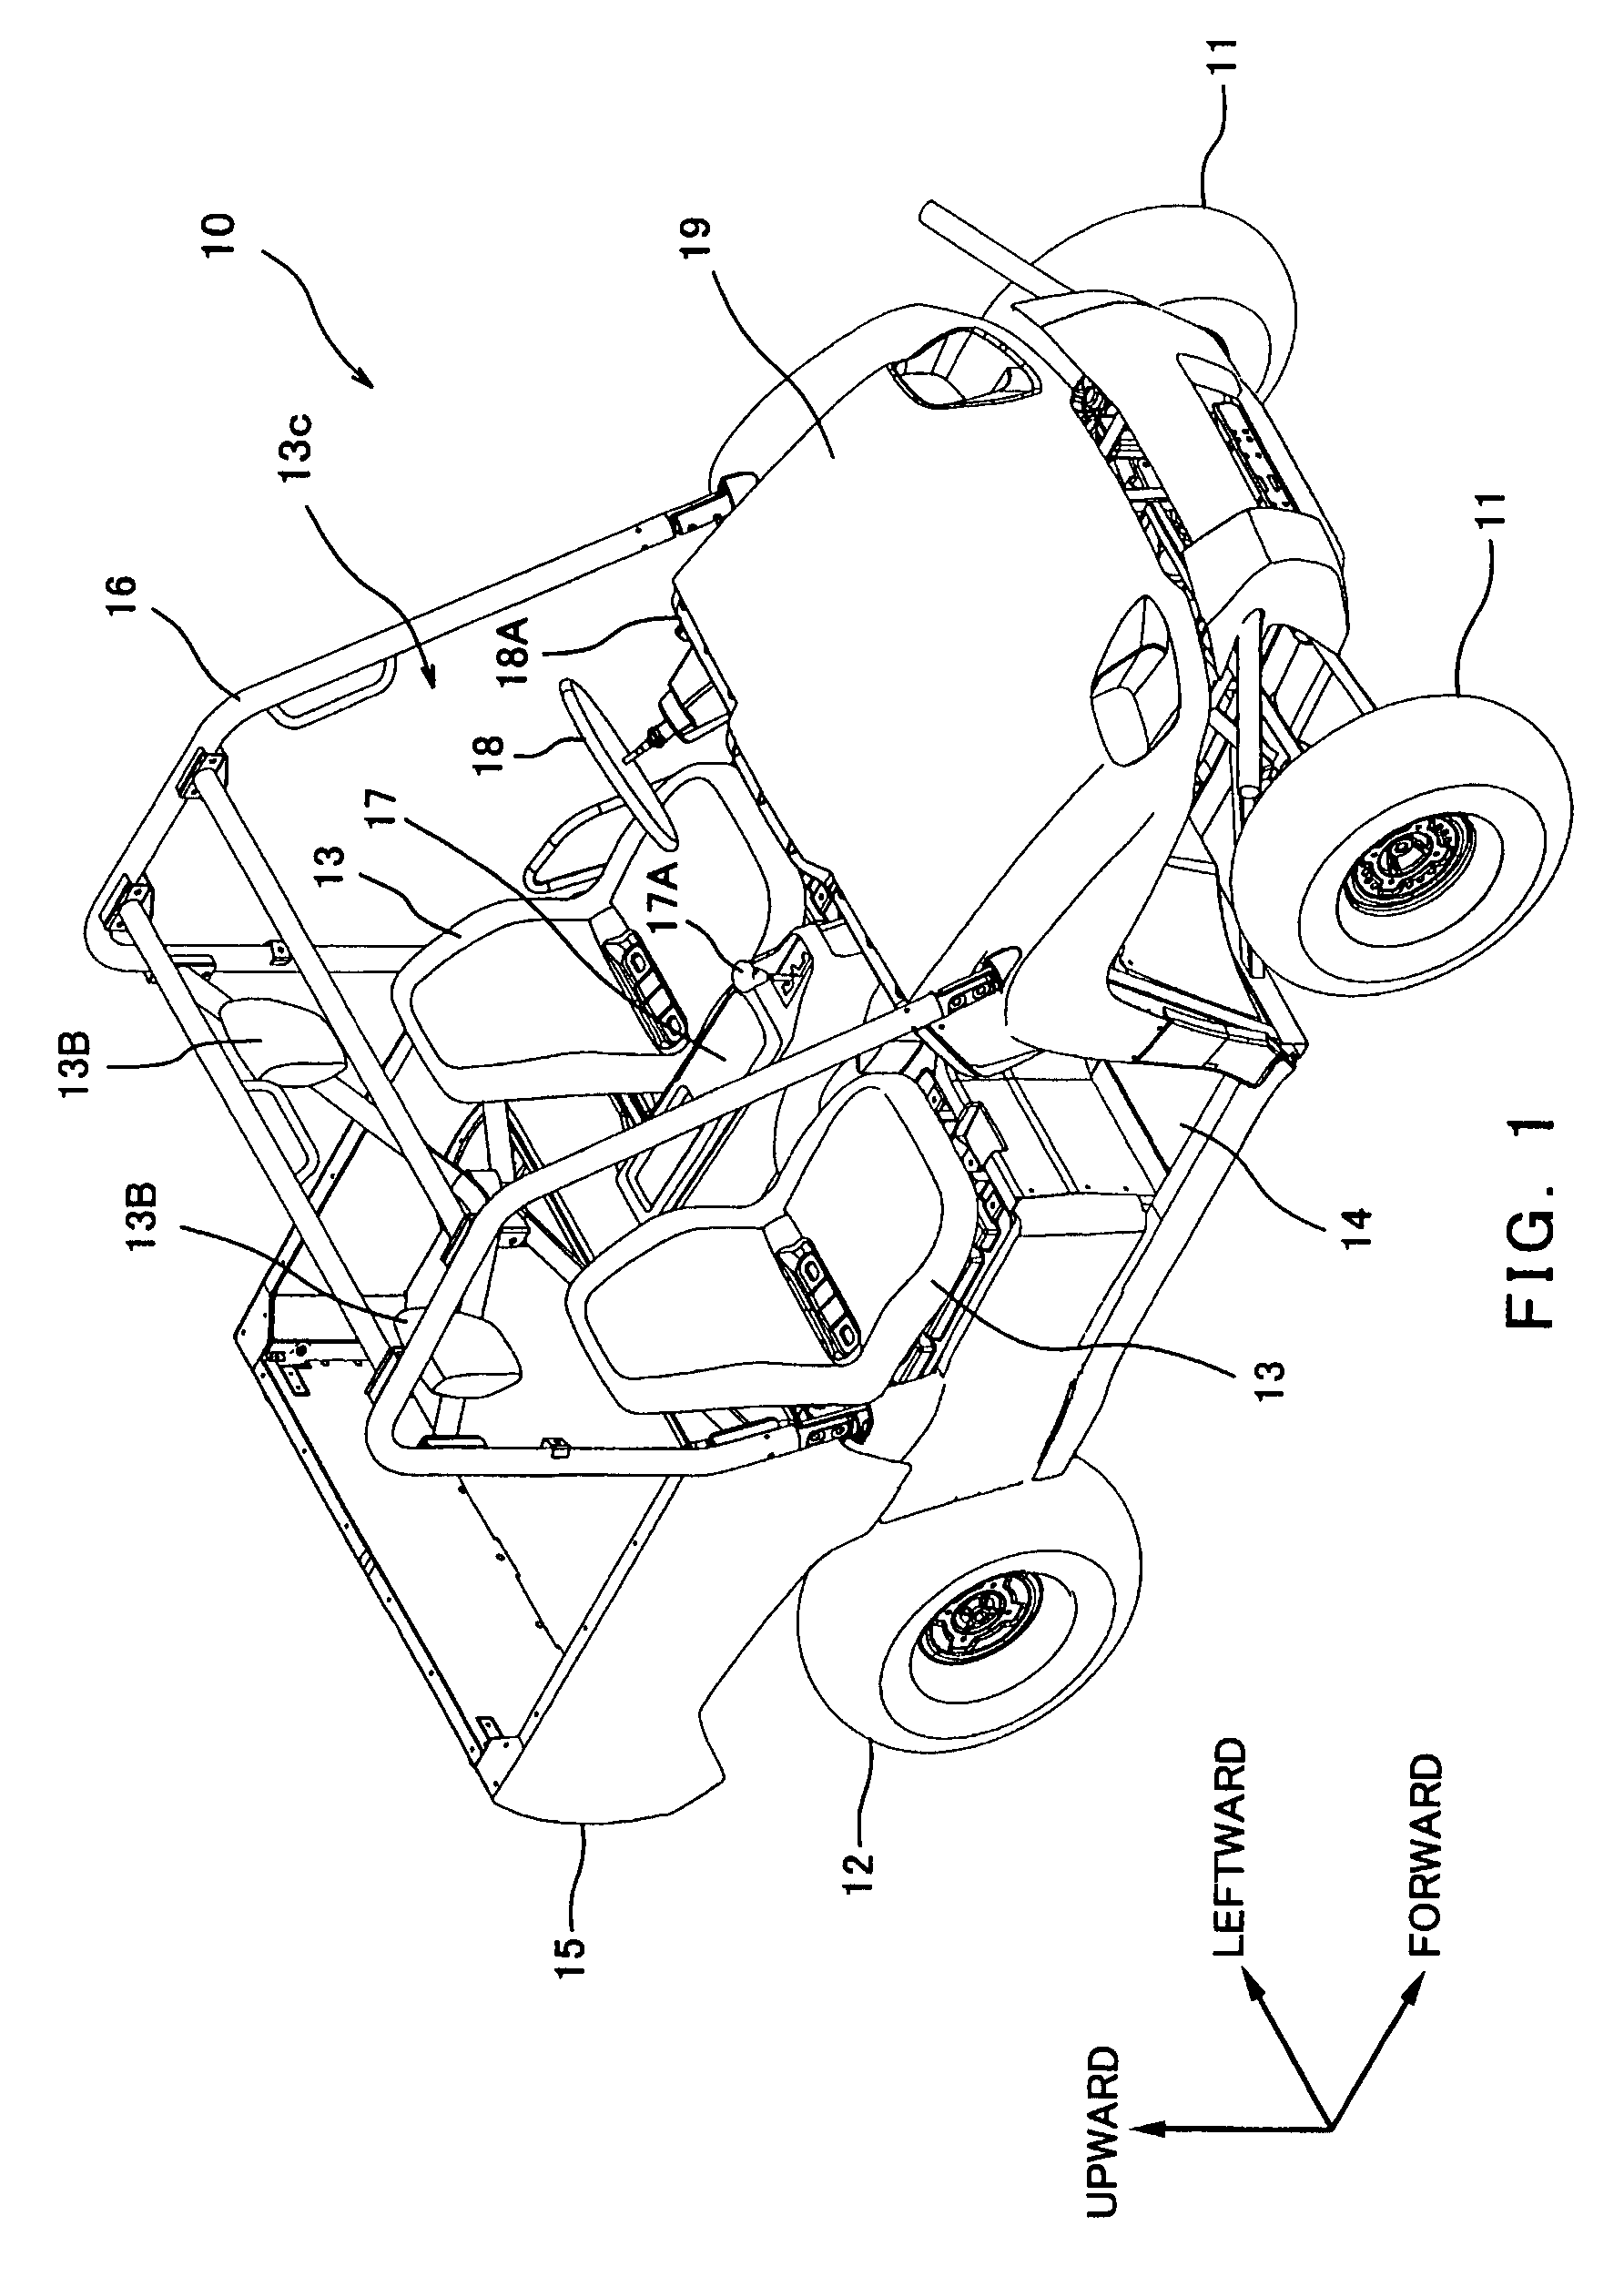 Wet brake system for a vehicle and a utility vehicle comprising the wet brake system